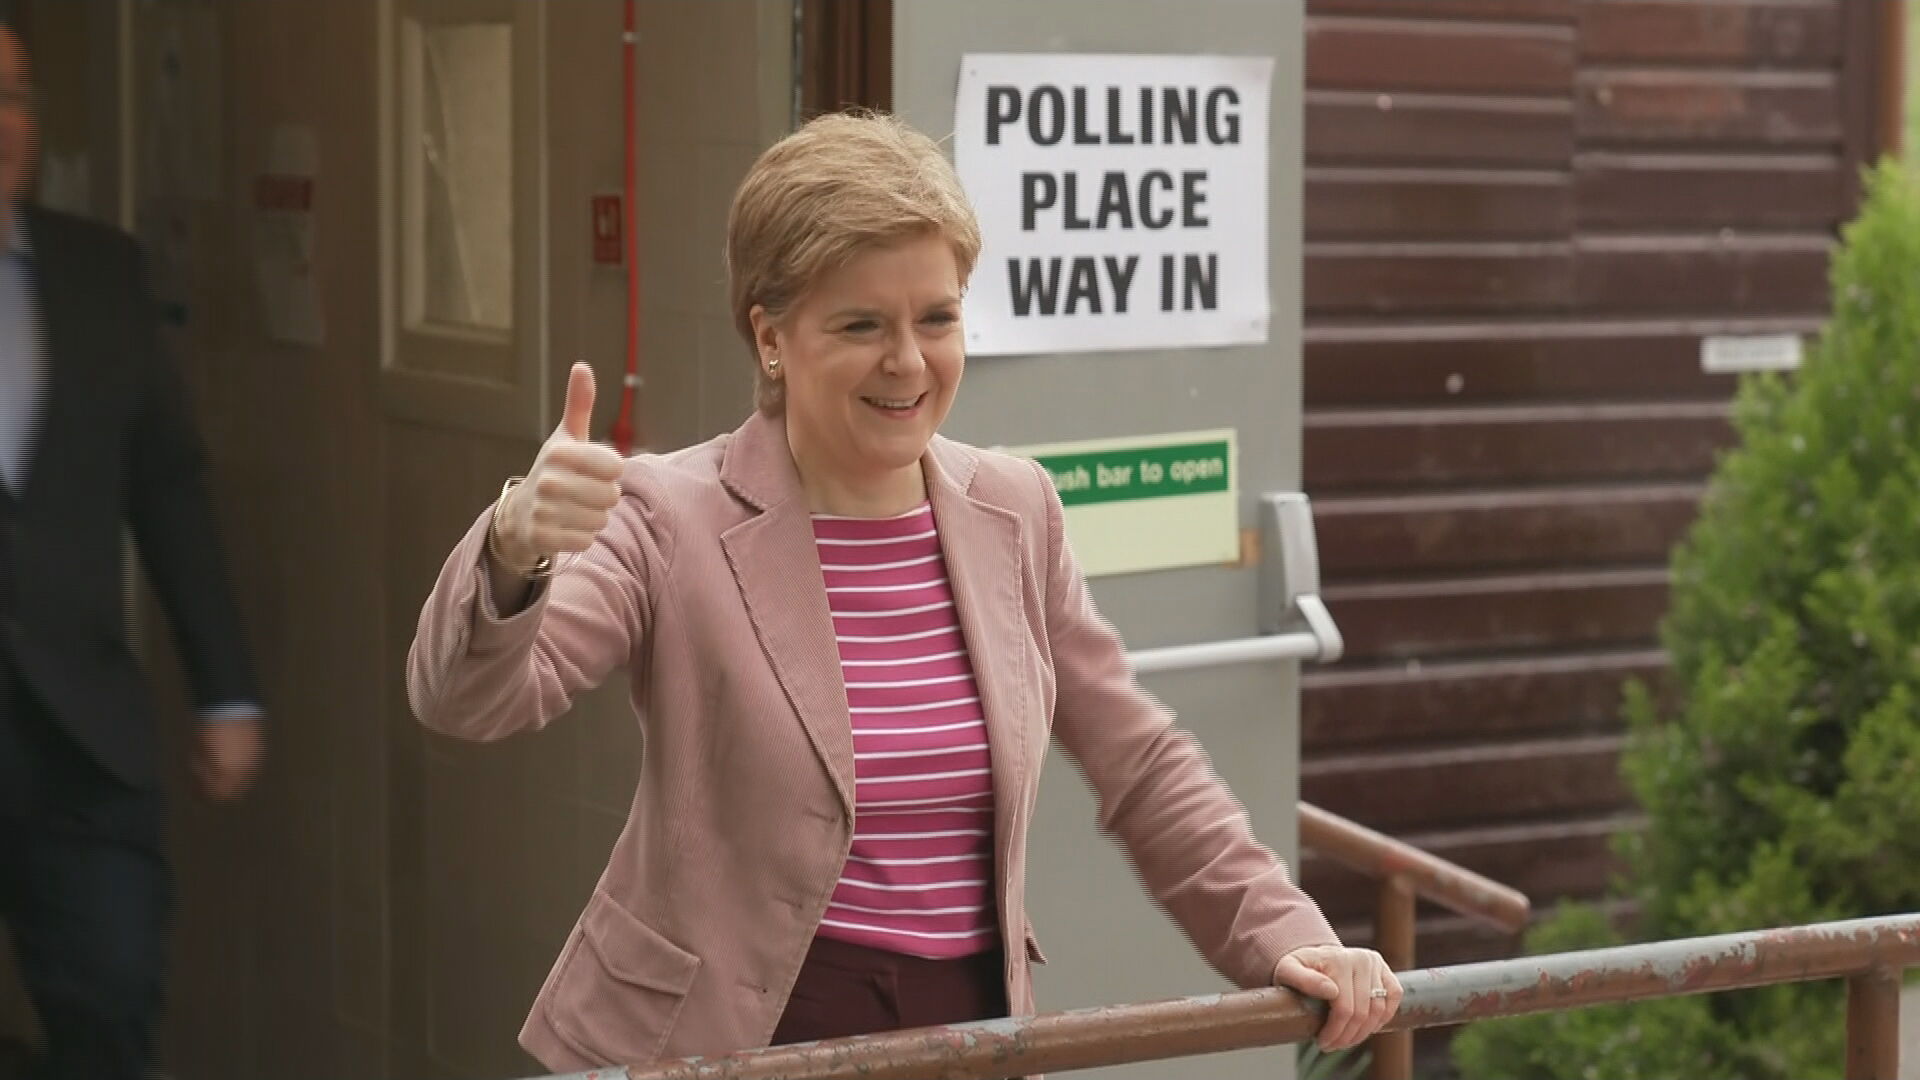 Nicola Sturgeon set out plans for Scots to vote on October 19 next year.